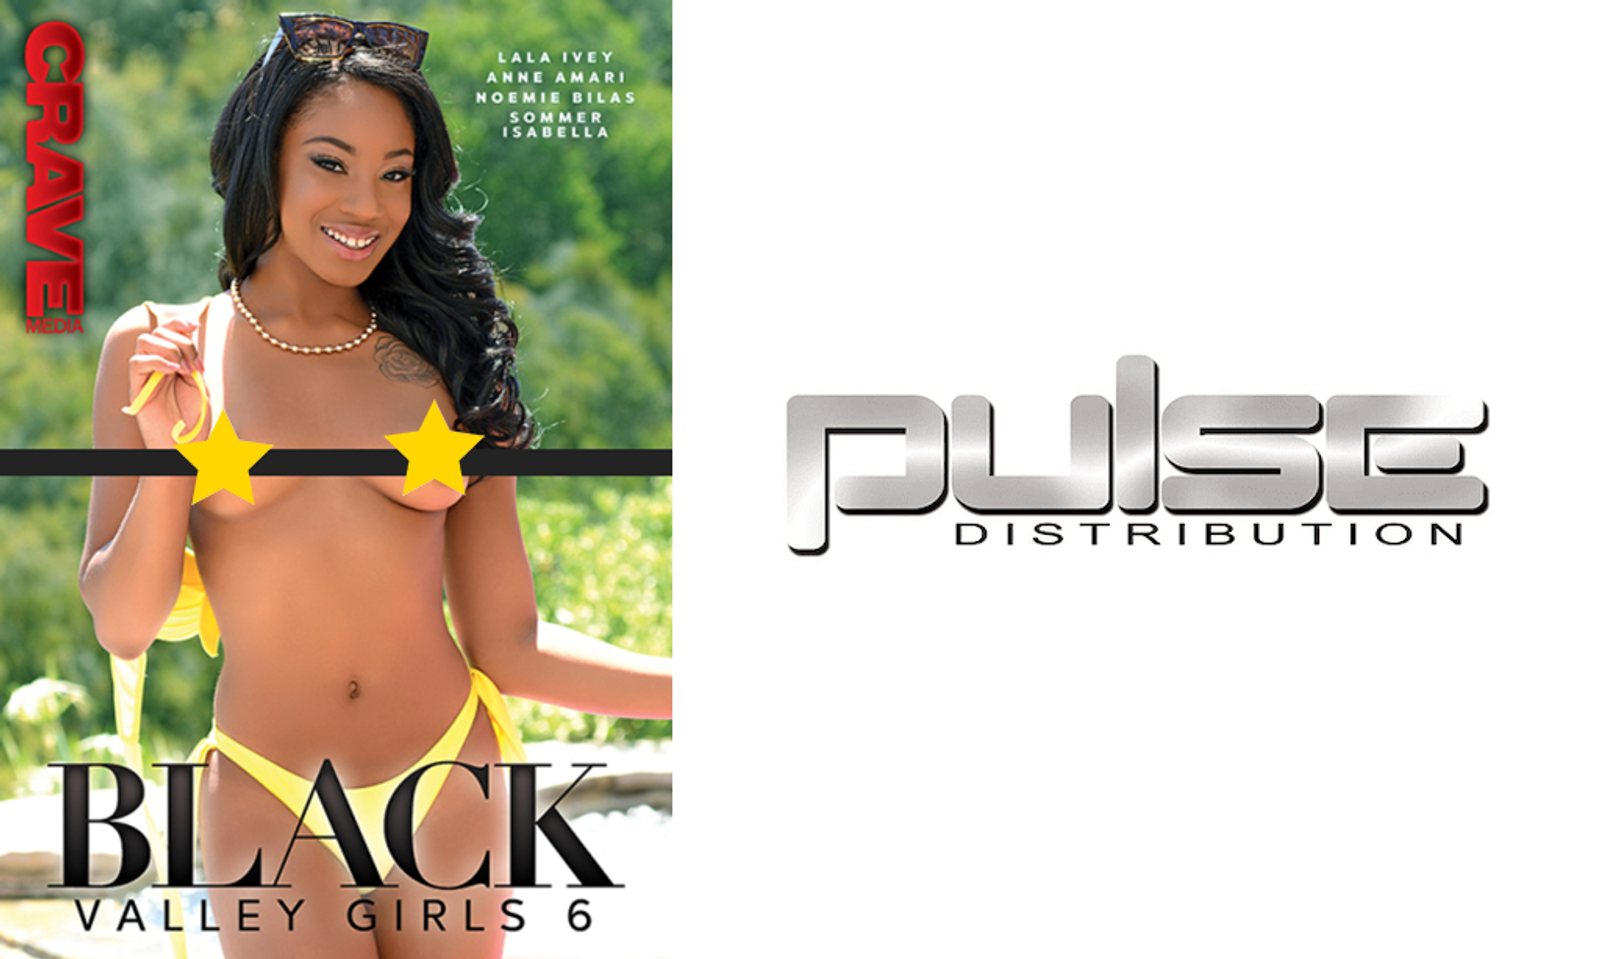 Four Ebony Beauties Star in Crave Media's ‘Black Valley Girls 6’